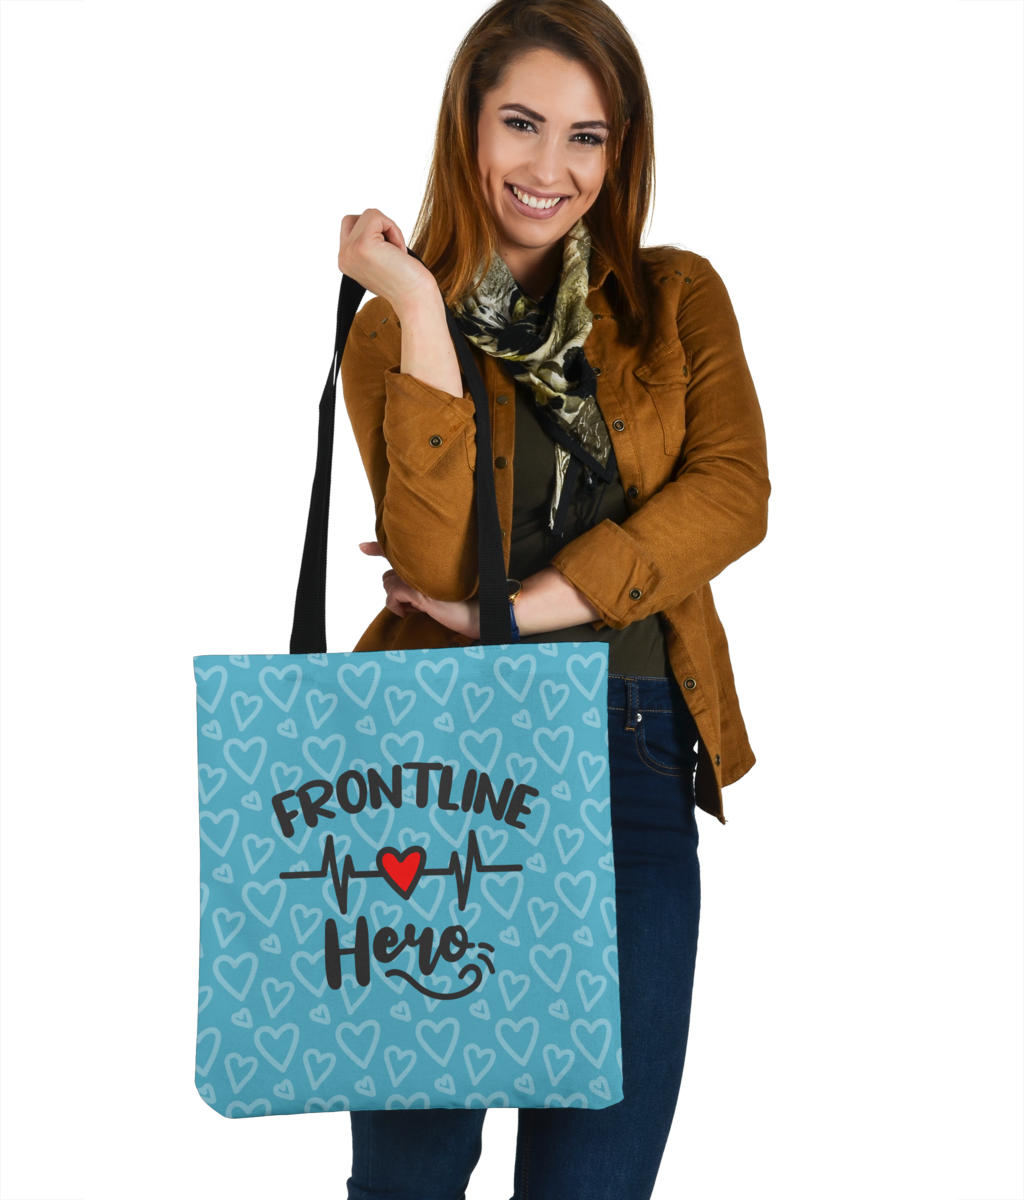 Frontline Worker Heart Cloth Tote Bag